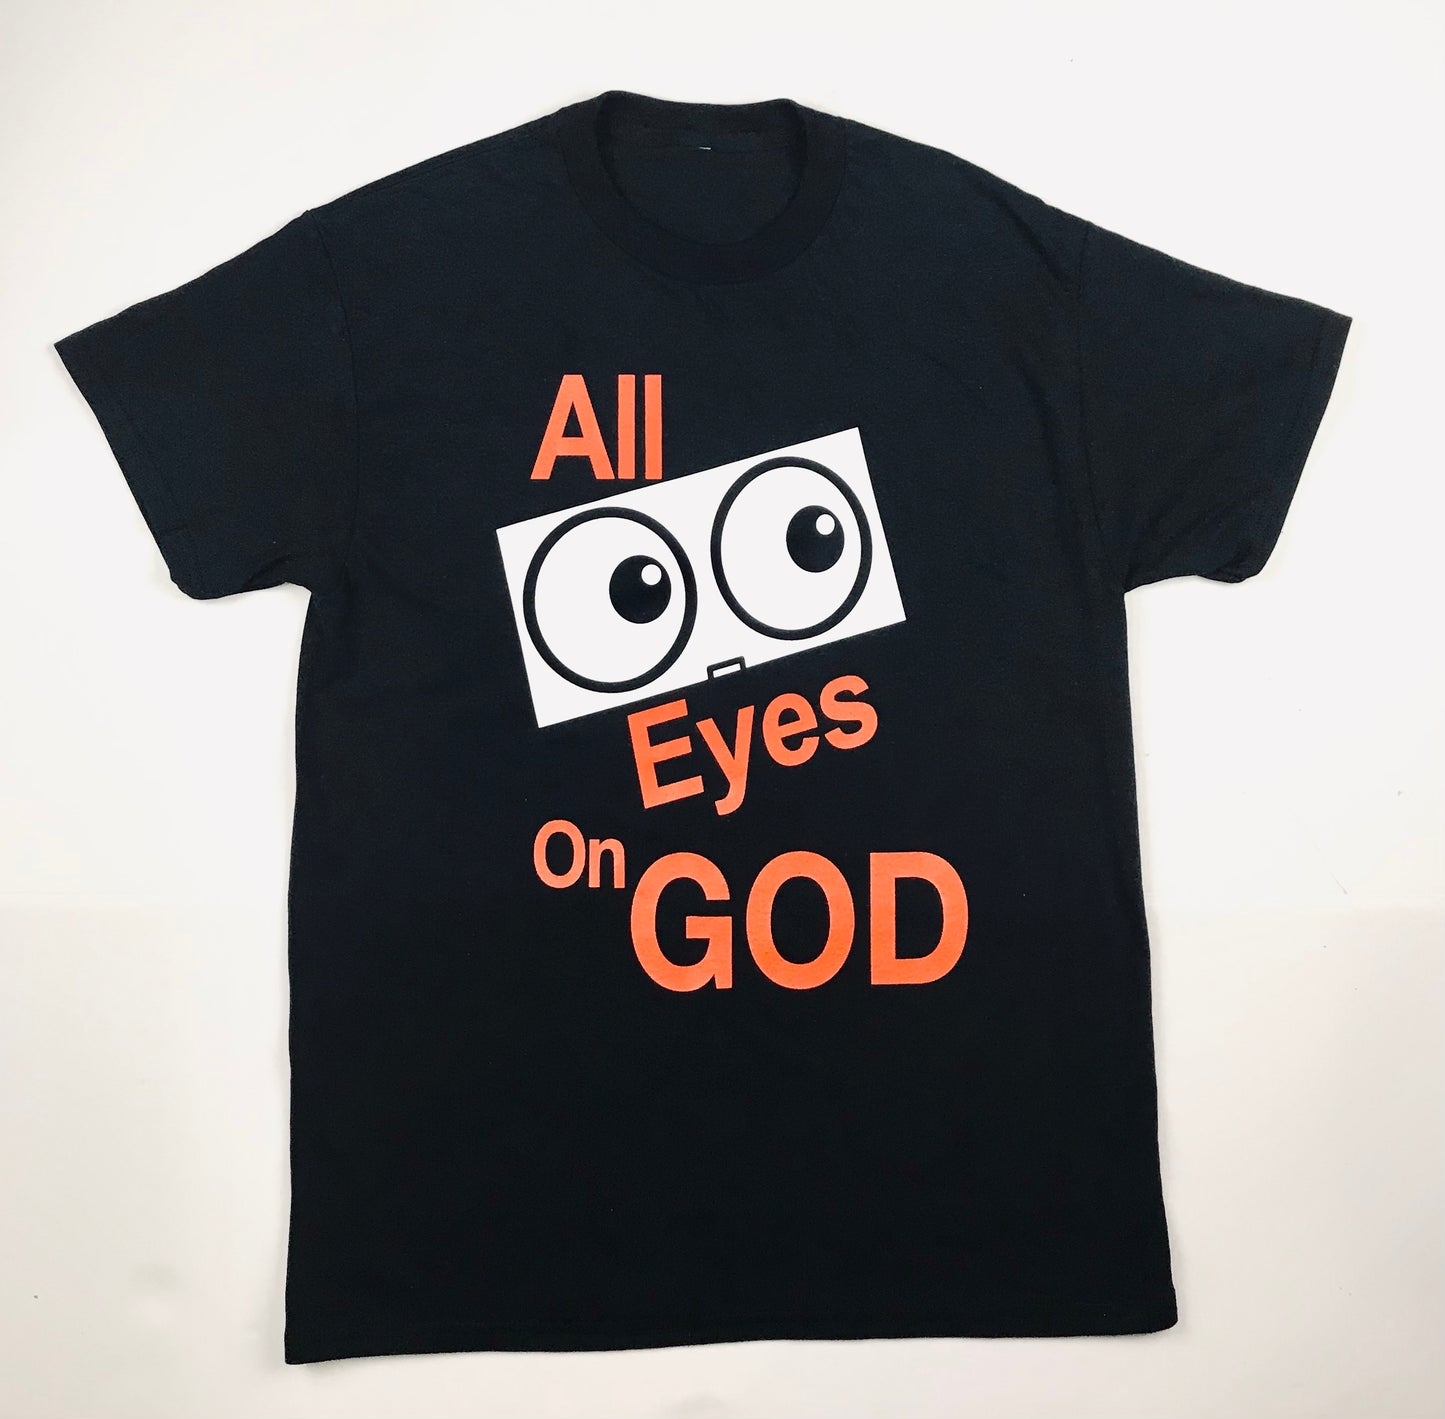 Limited "All Eyes" Tee sale